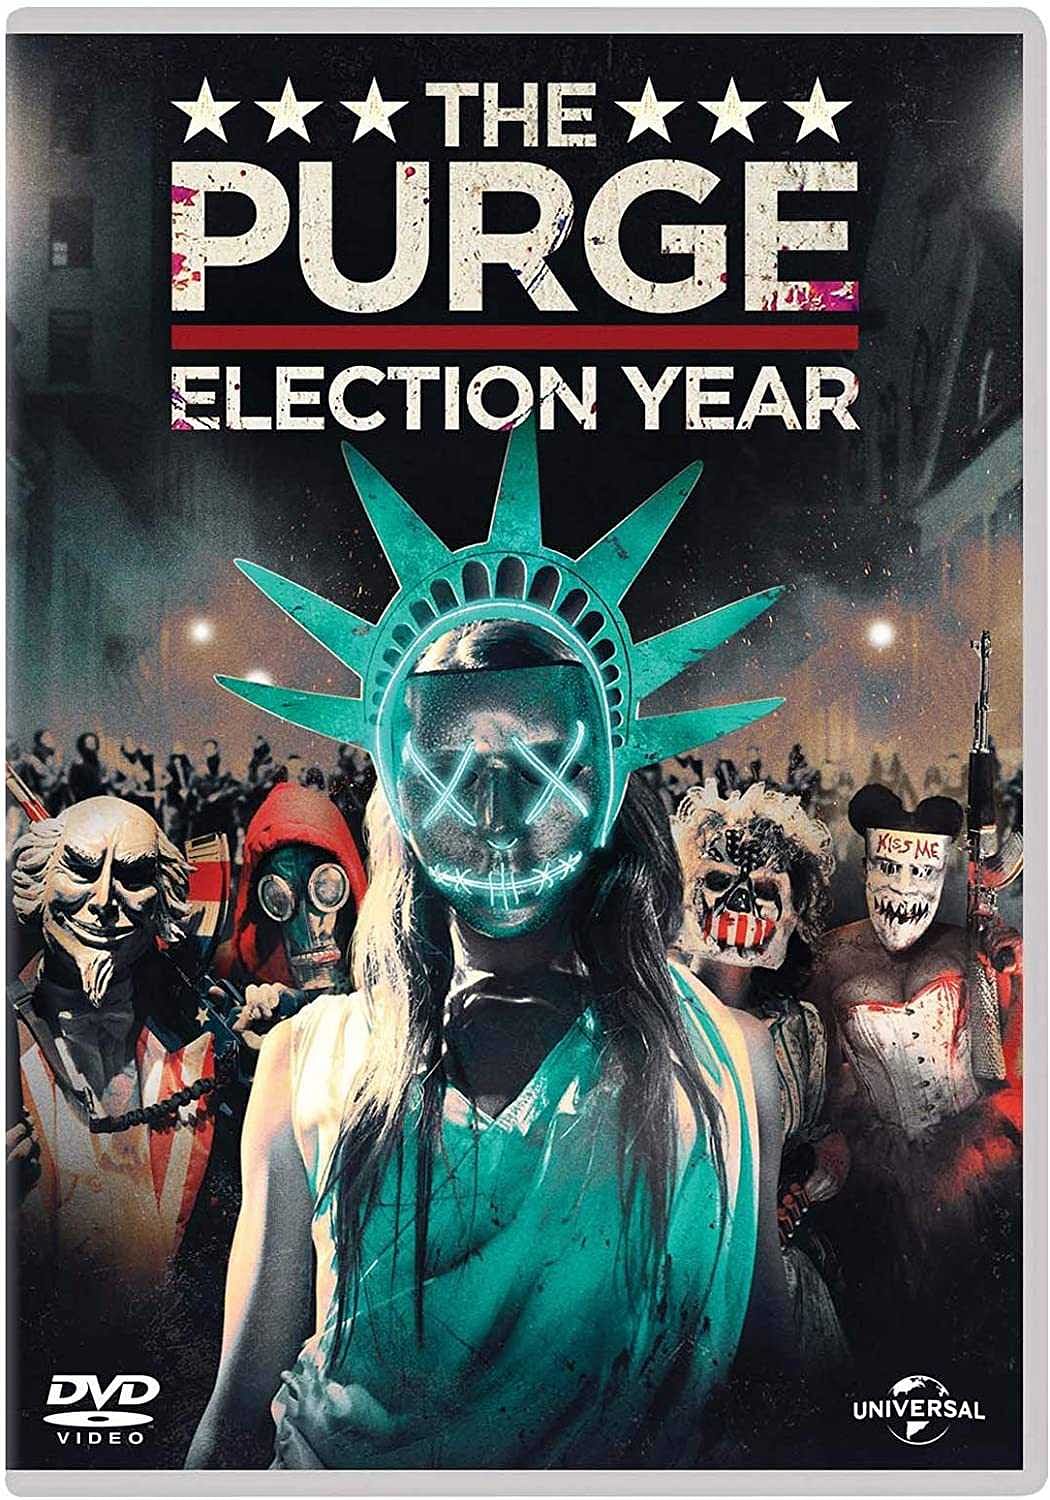 The Purge: Election Year - DVD